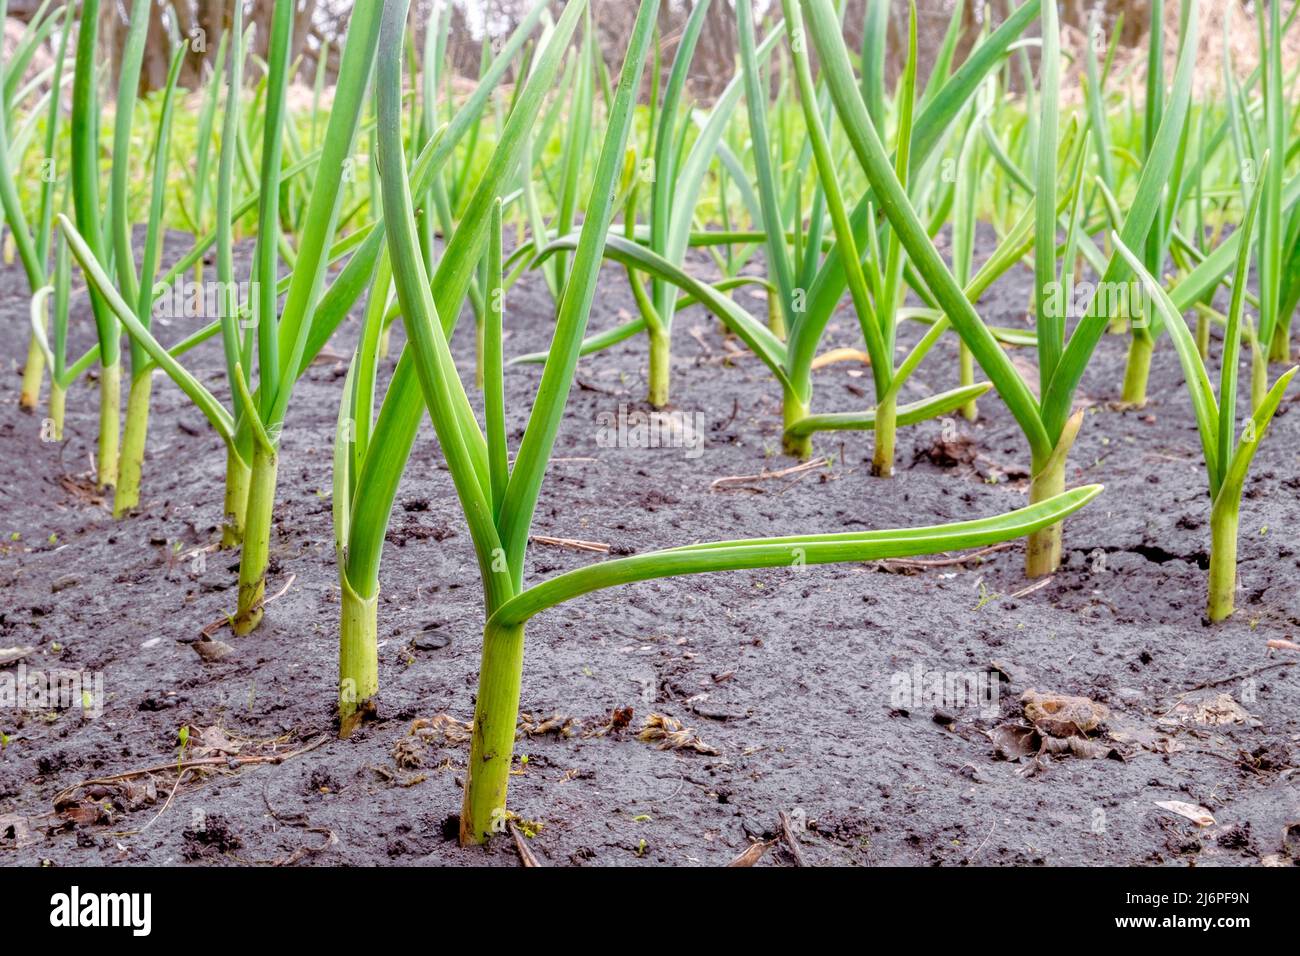 Garlic. Young plants in a row in a bed on a homestead plot in early spring. Stock Photo